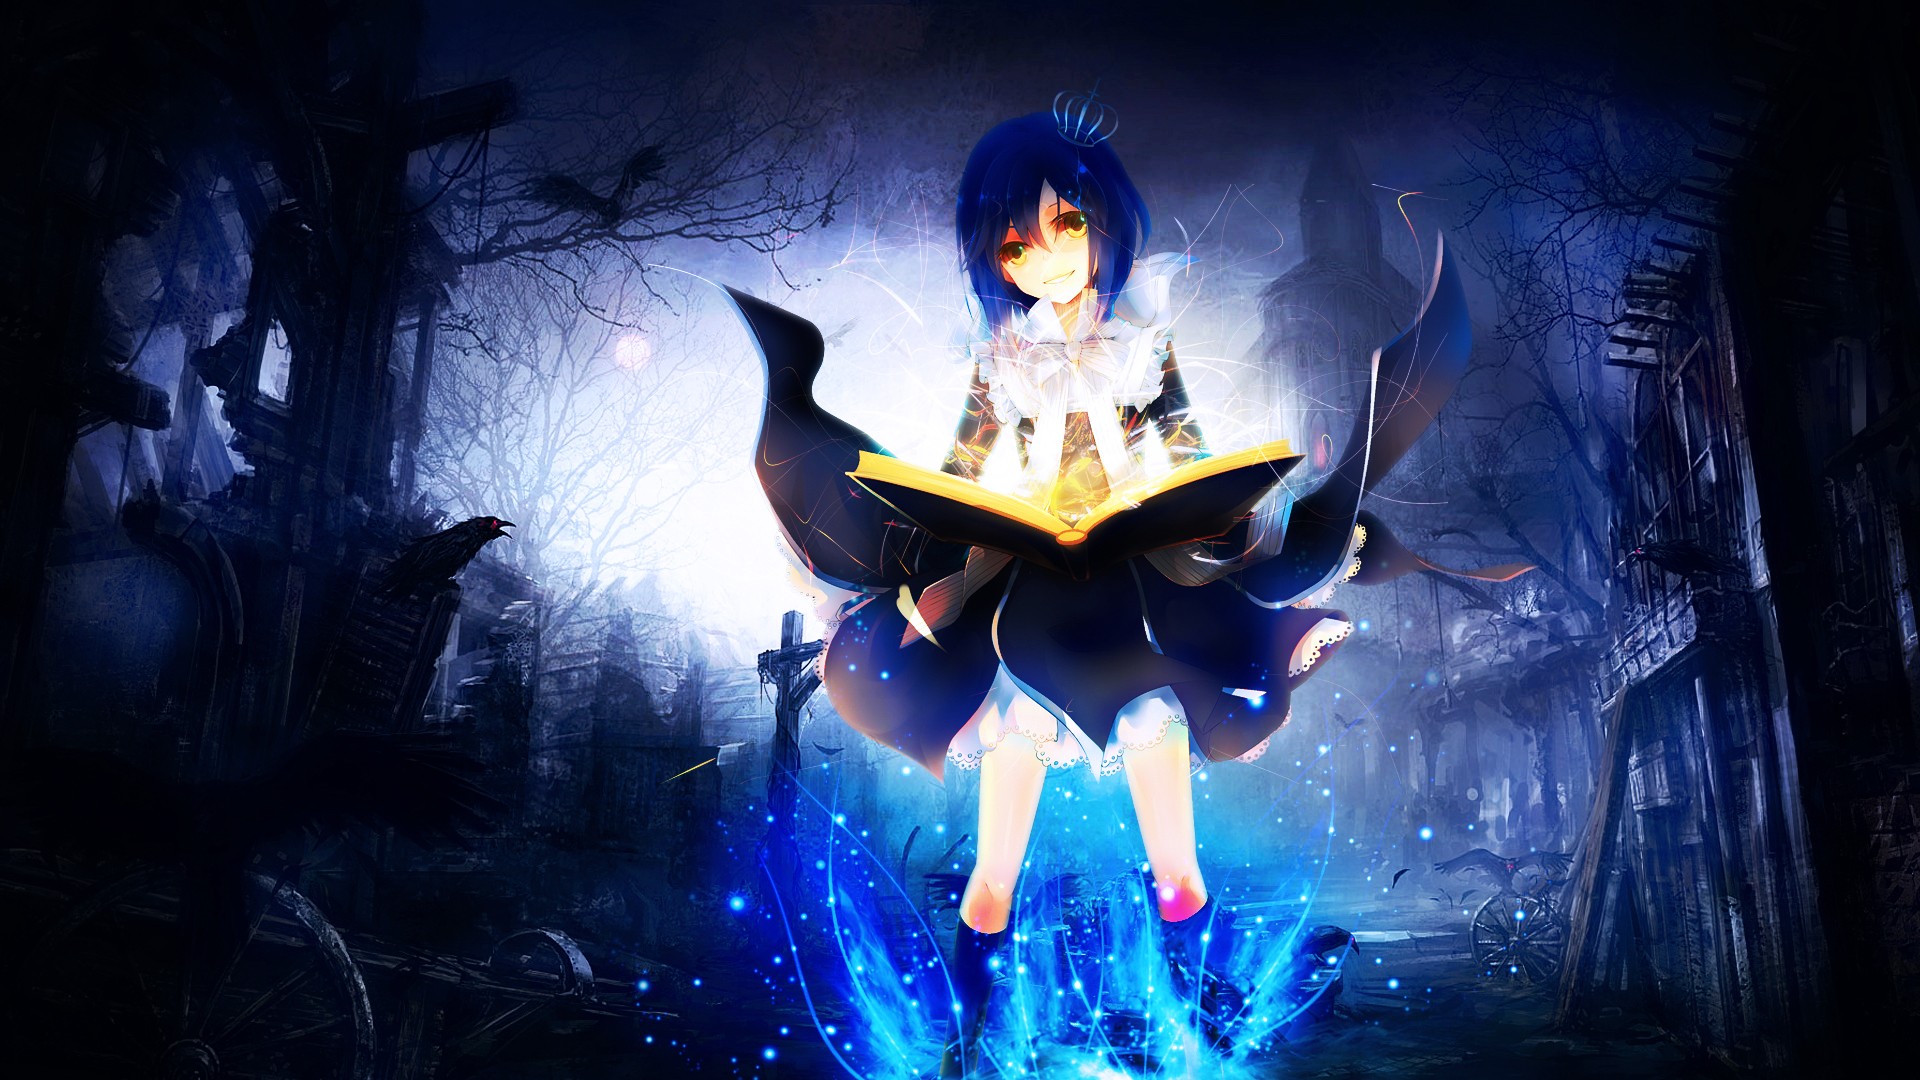 Free download Anime Girl With Magic wallpaper 821742 [1920x1080] for your Desktop, Mobile & Tablet. Explore Magic Wallpaper. Orlando Magic Wallpaper, Orlando Magic Wallpaper, Magic Mushrooms Wallpaper